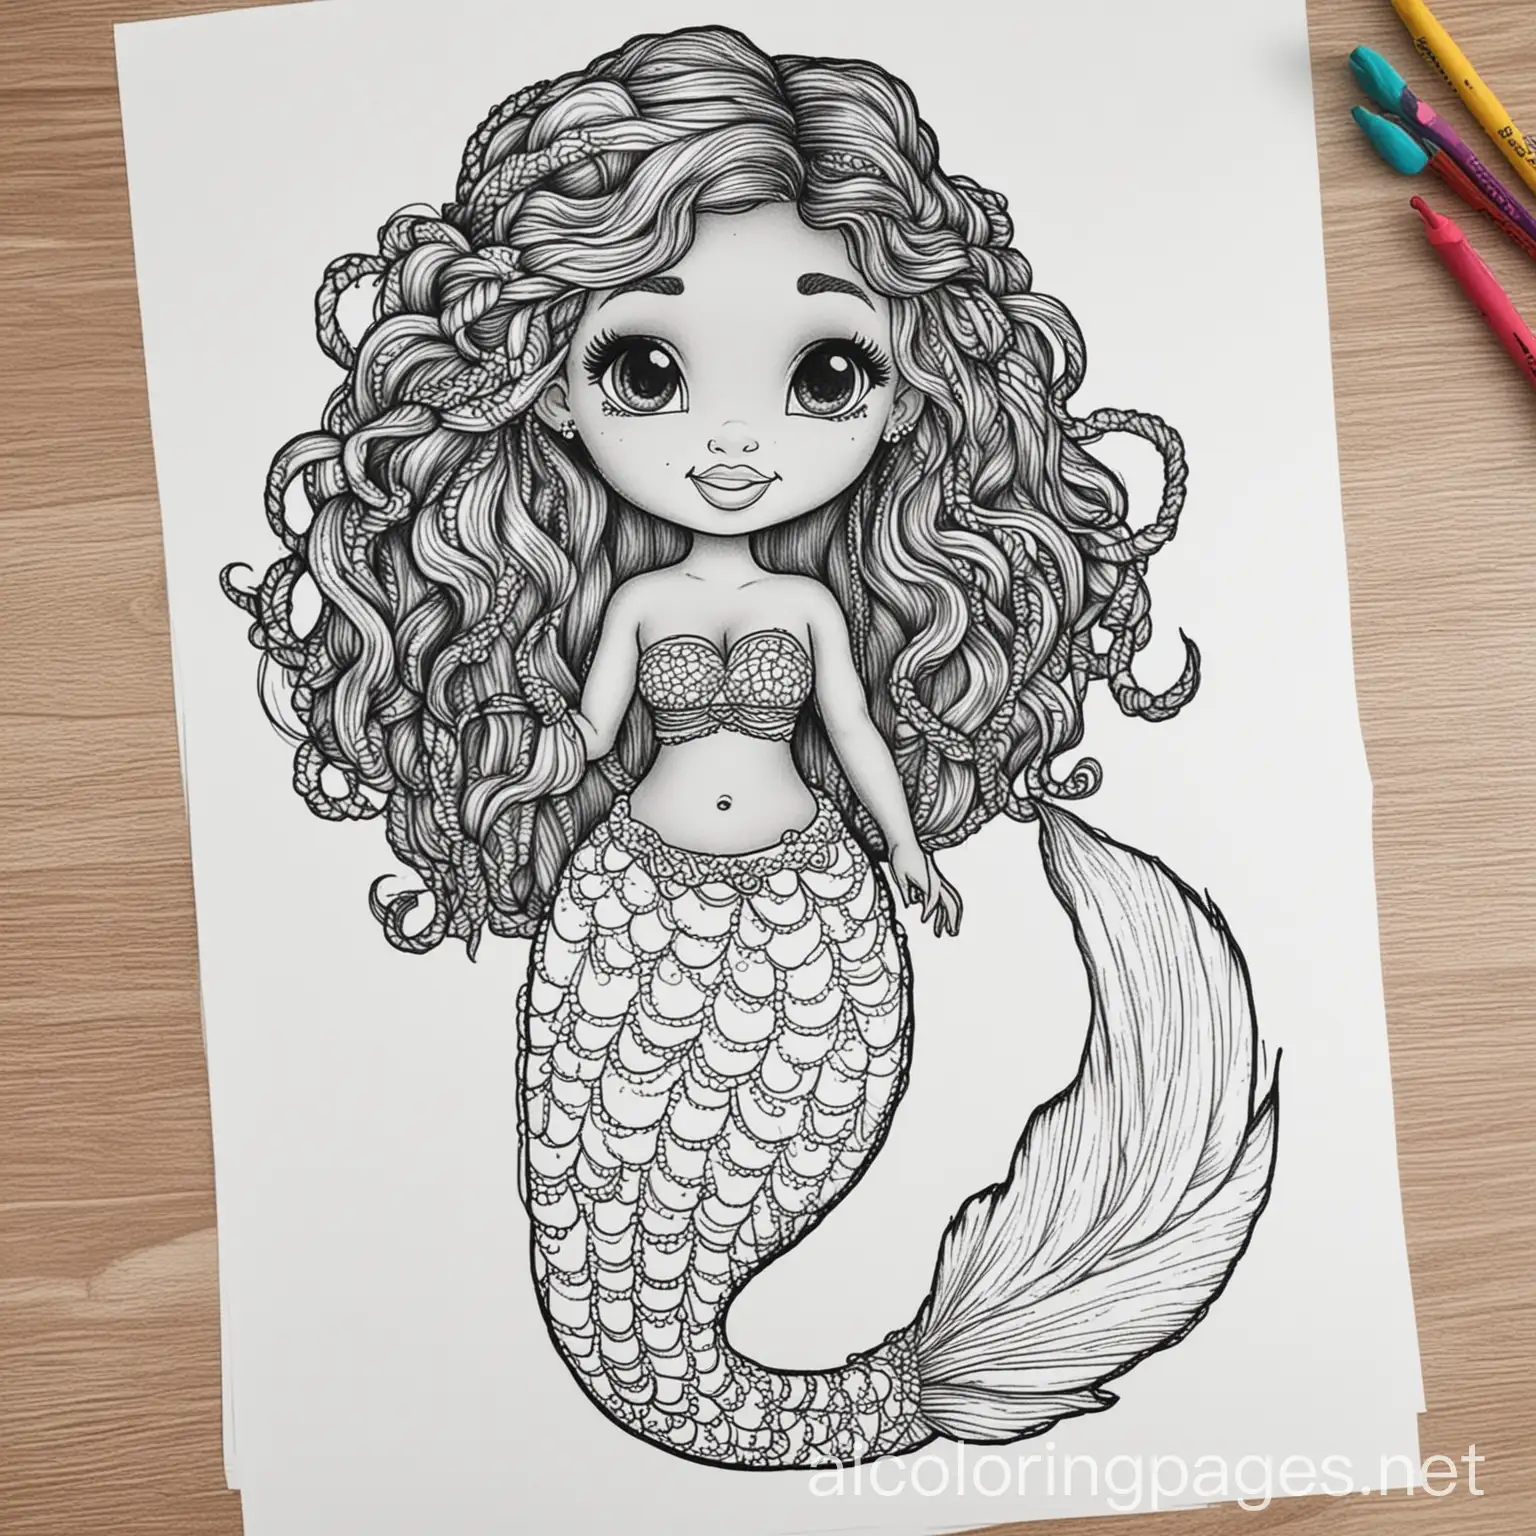 African American mermaid in black and white with braids coloring page with tail
, Coloring Page, black and white, line art, white background, Simplicity, Ample White Space. The background of the coloring page is plain white to make it easy for young children to color within the lines. The outlines of all the subjects are easy to distinguish, making it simple for kids to color without too much difficulty